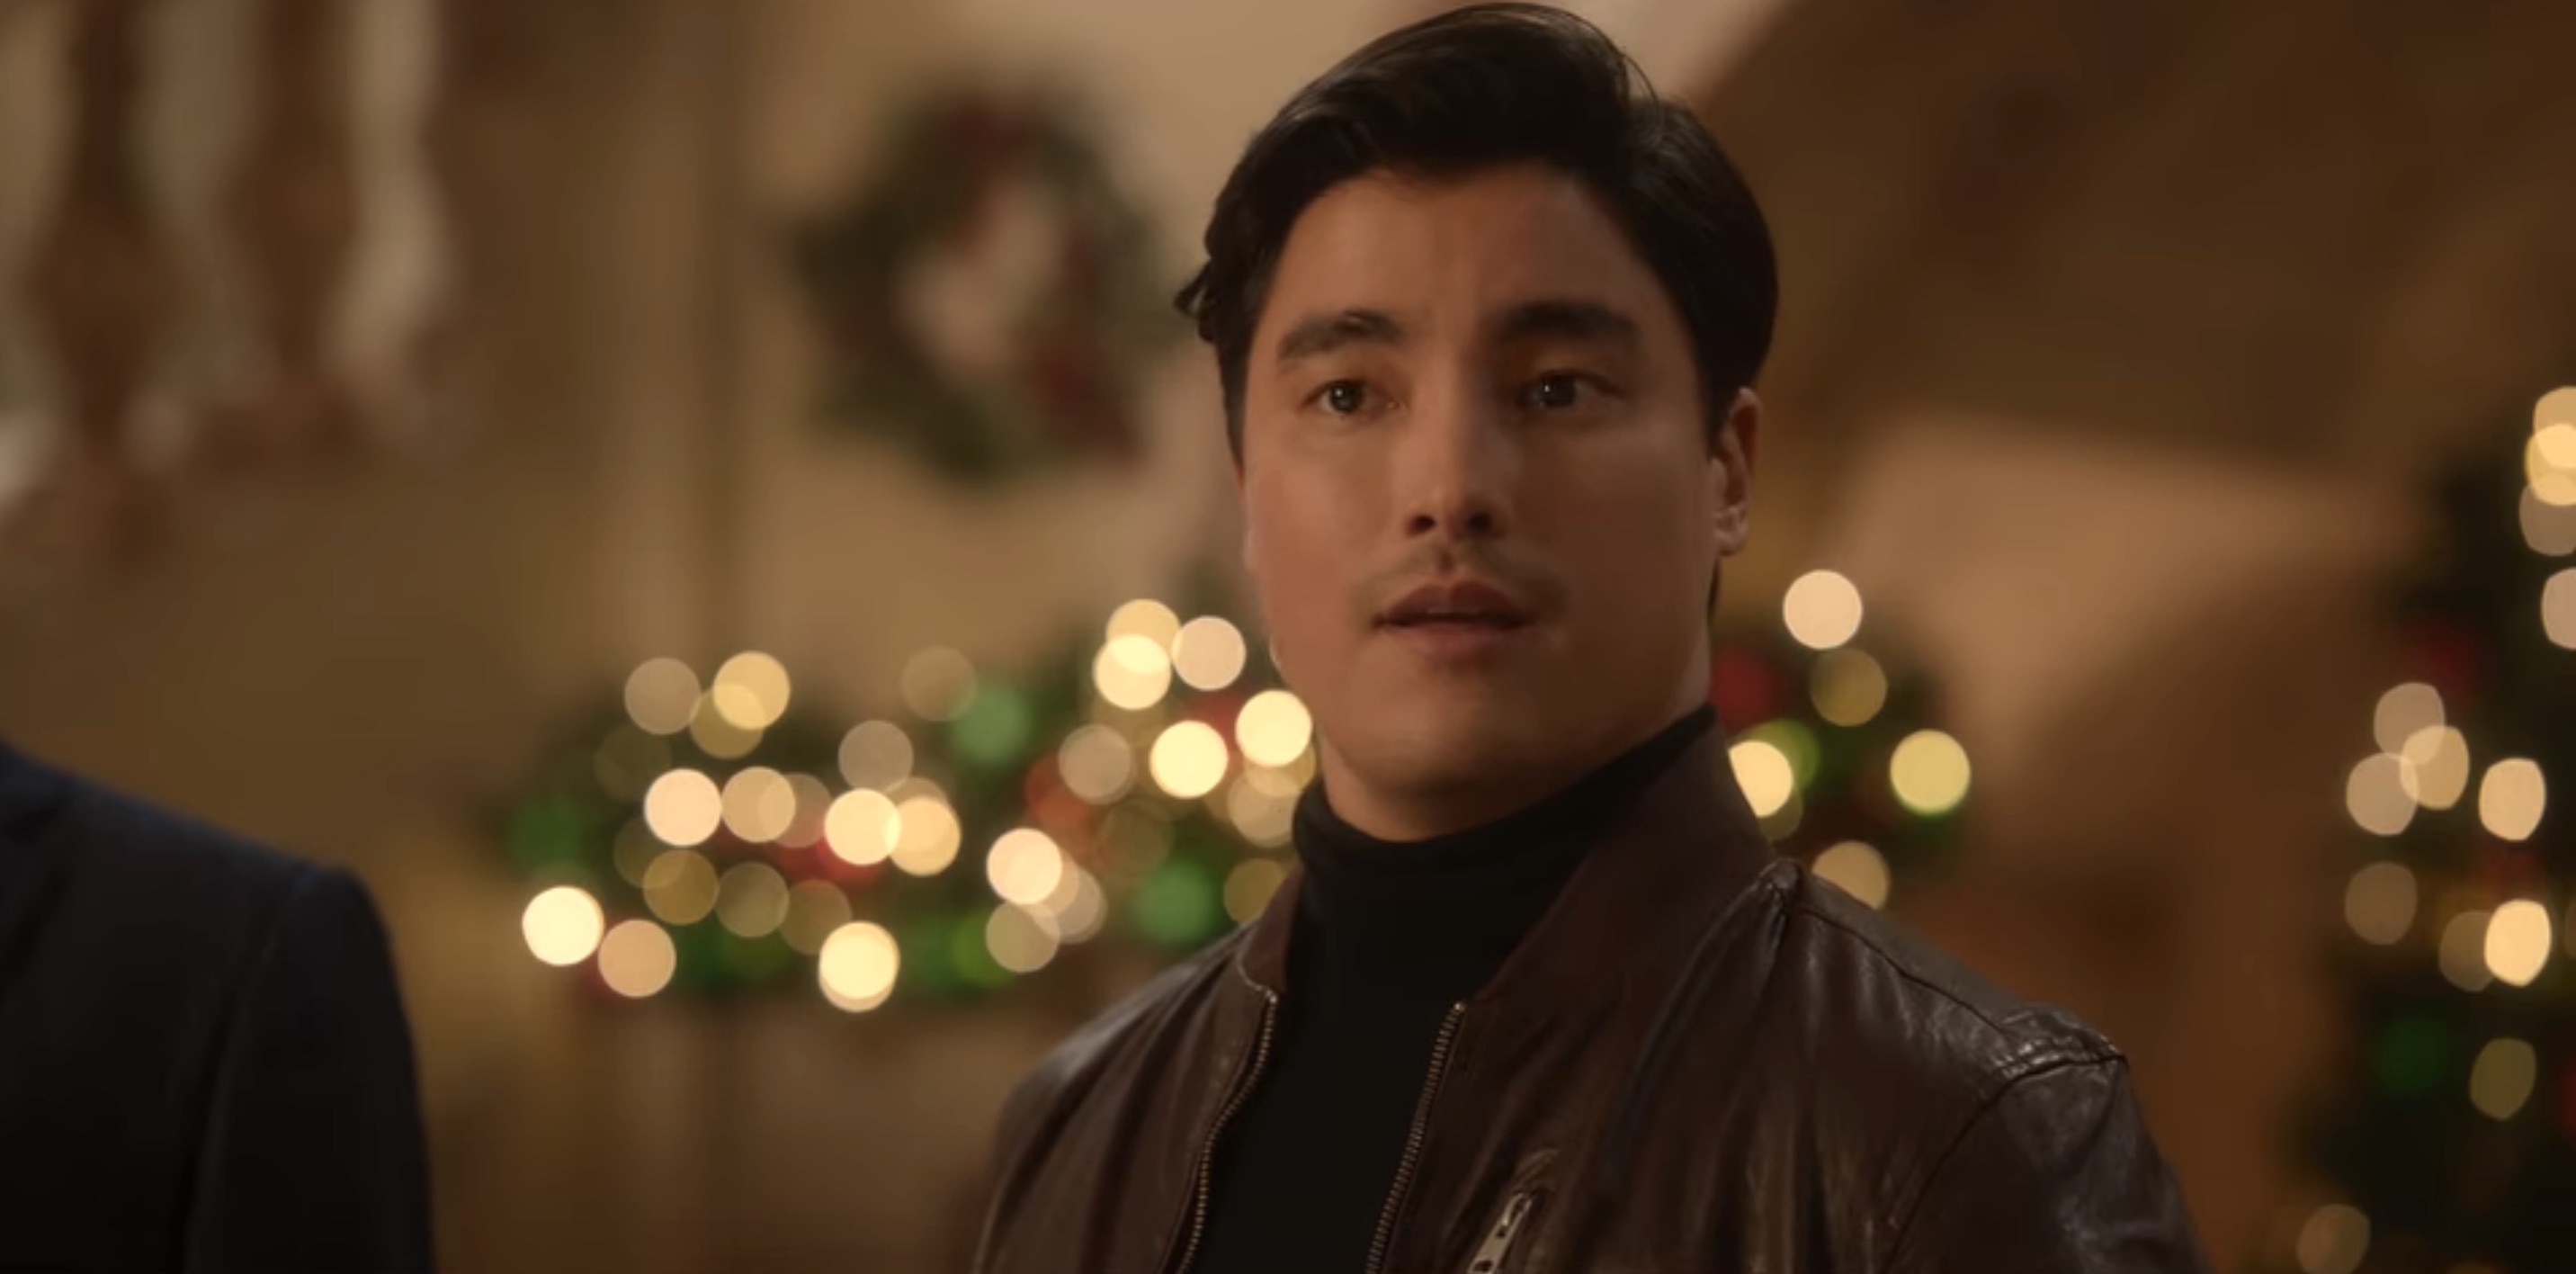 The Princess Switch 3 Cast - Remy Hii as Peter Maxwell